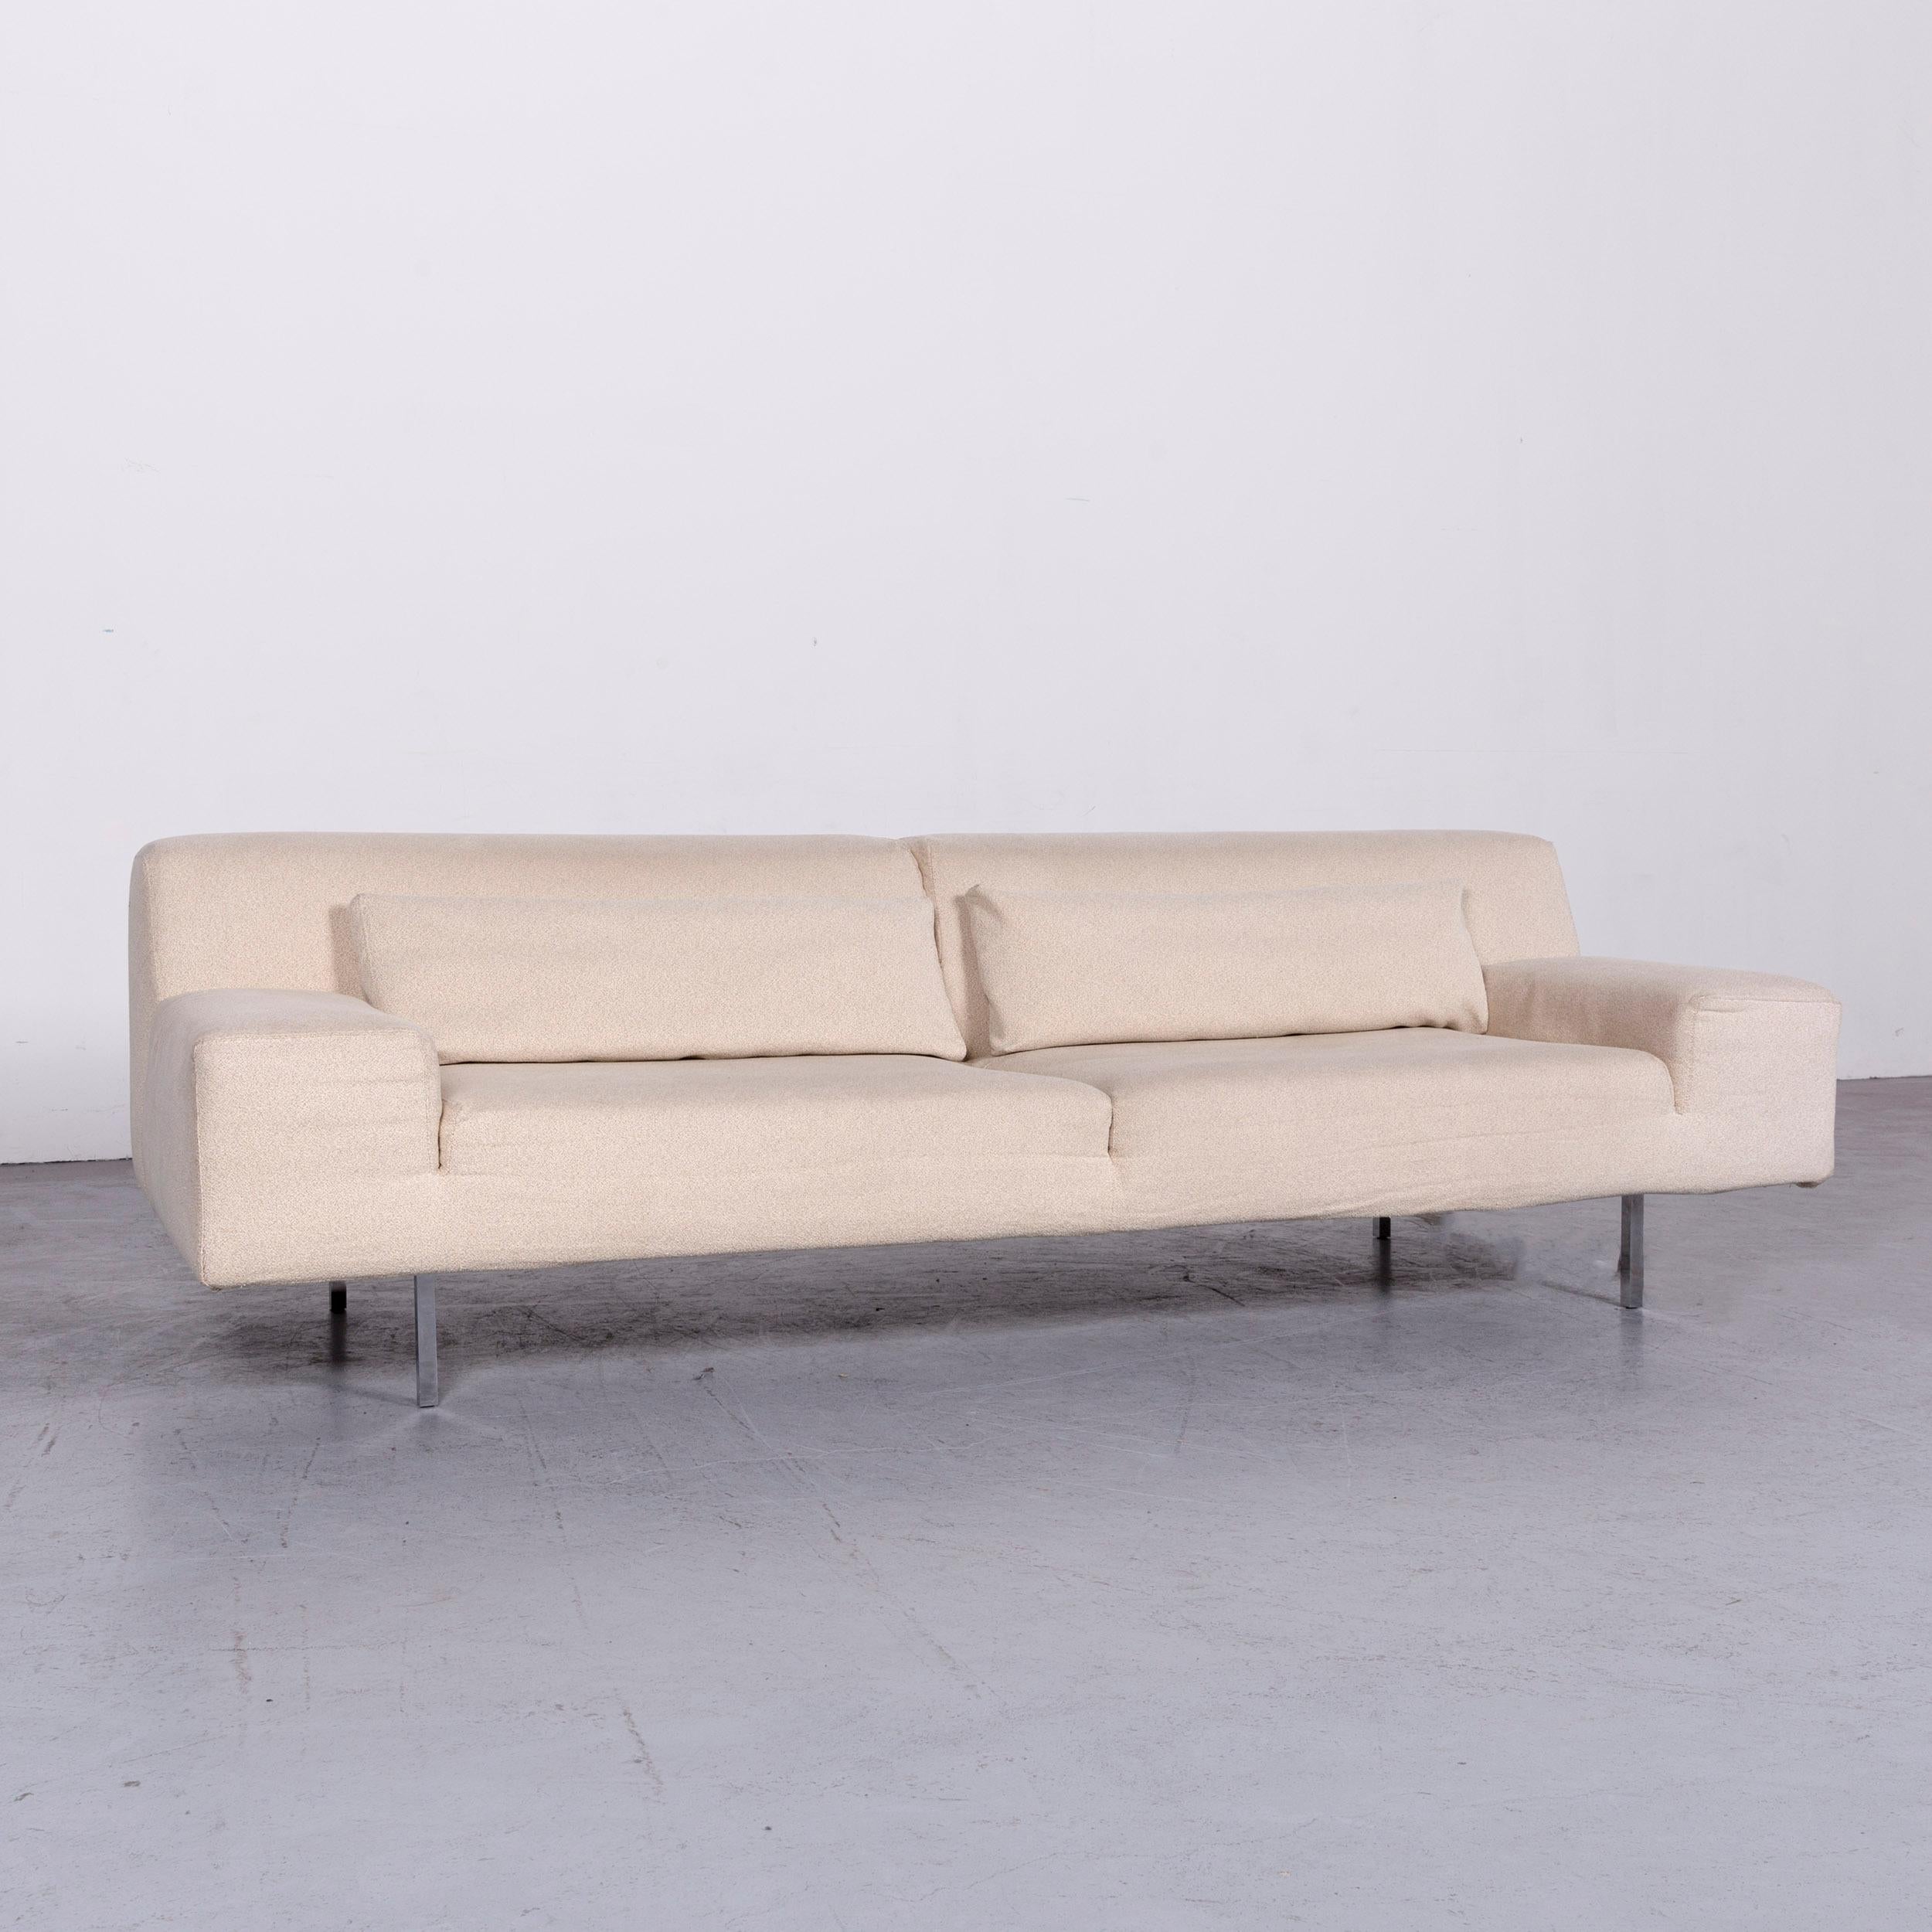 We bring to you a Molteni designer fabric sofa footstool set crème three-seat couch.